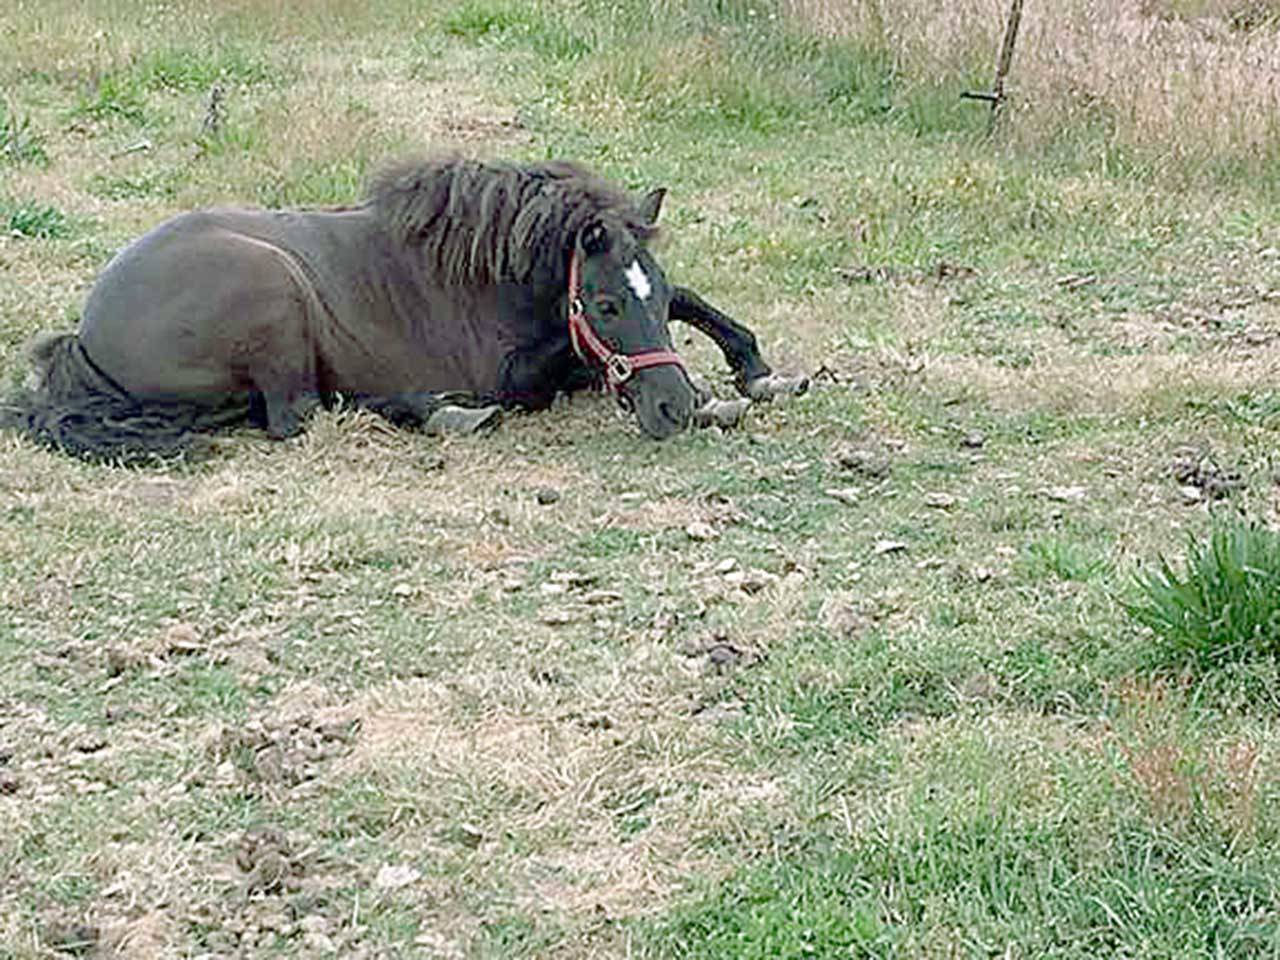 When Daisy was surrendered to OPEN, she had been neglected, foundered and was suffering pain caused by her grossly overgrown hooves. She had to be medicated before the farrier could trim her hooves. (Olympic Peninsula Equine Network)